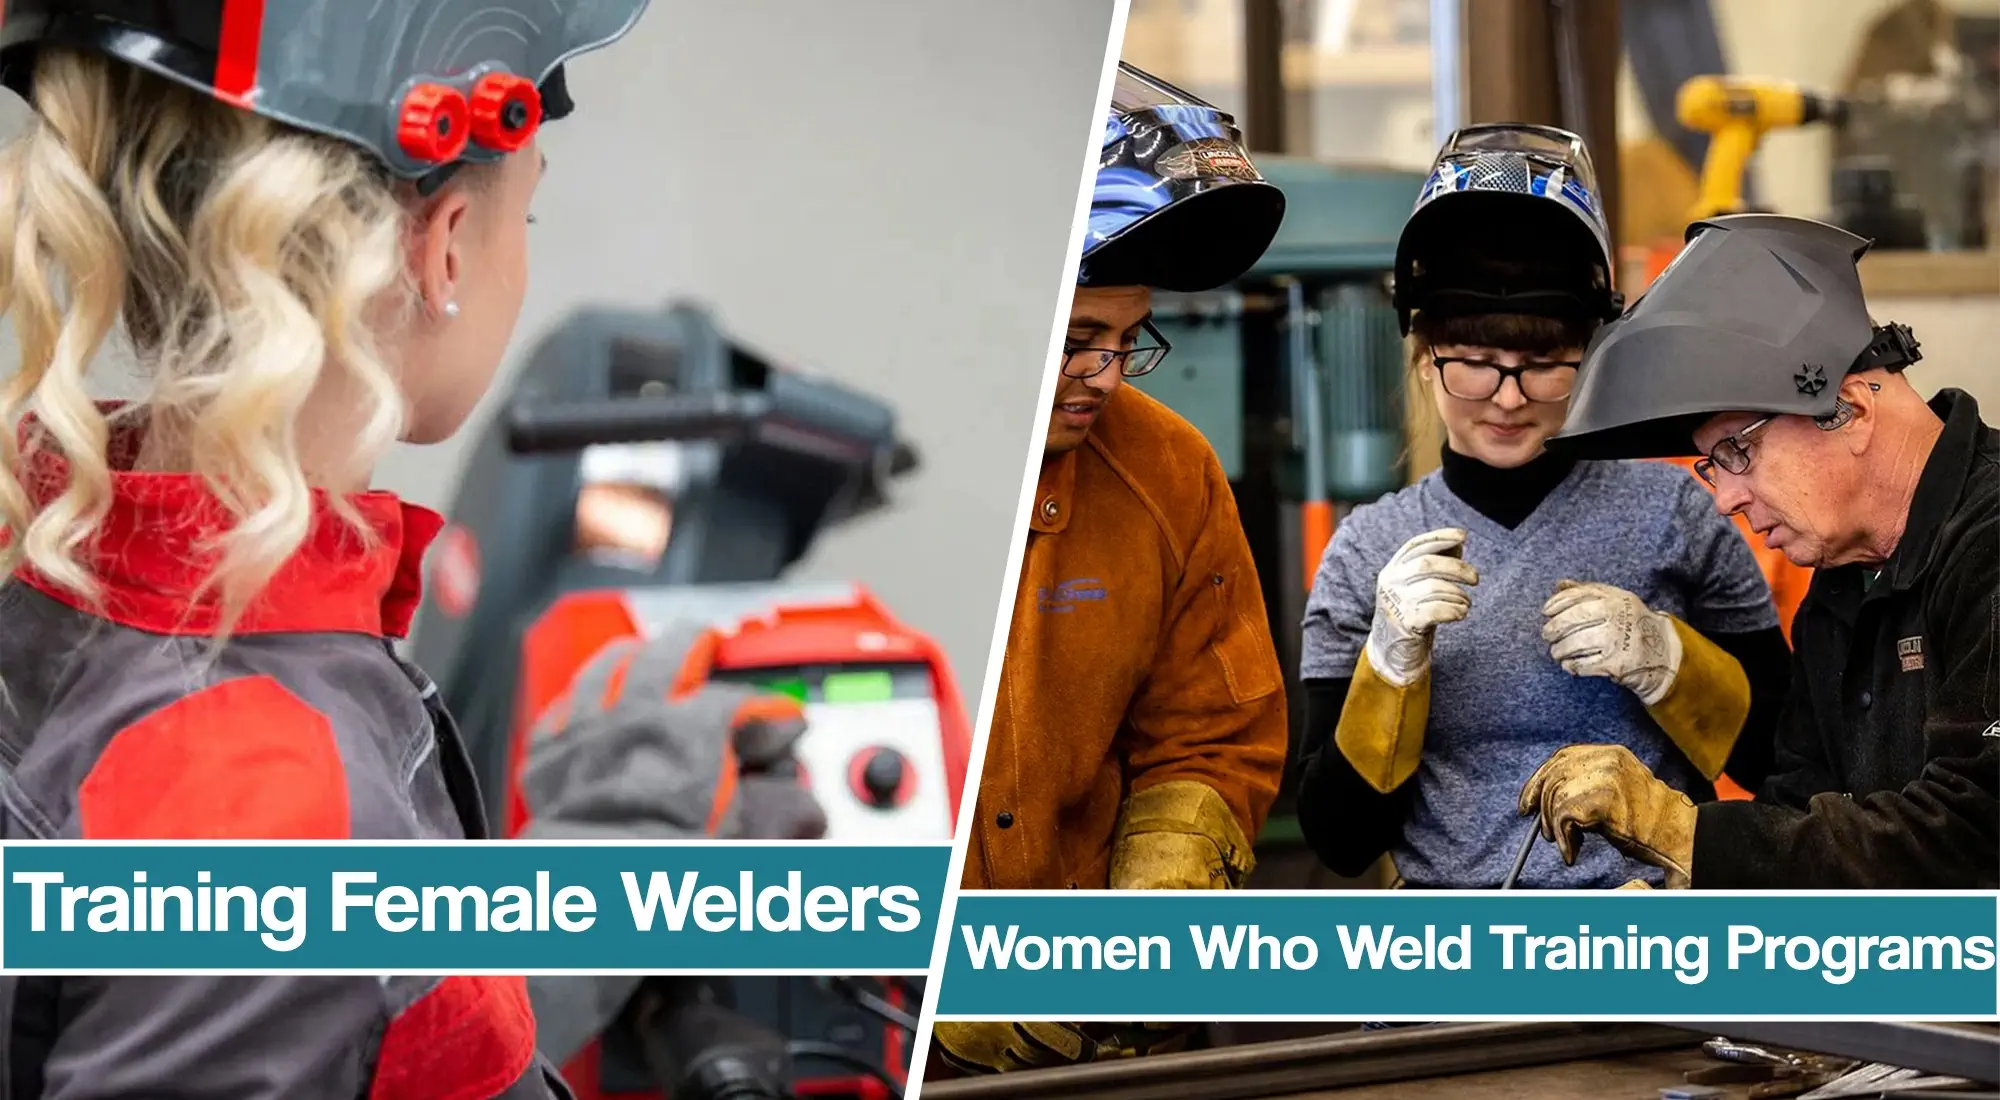 Training Female Welders – Women Who Weld Popular Training Programs And Experiences